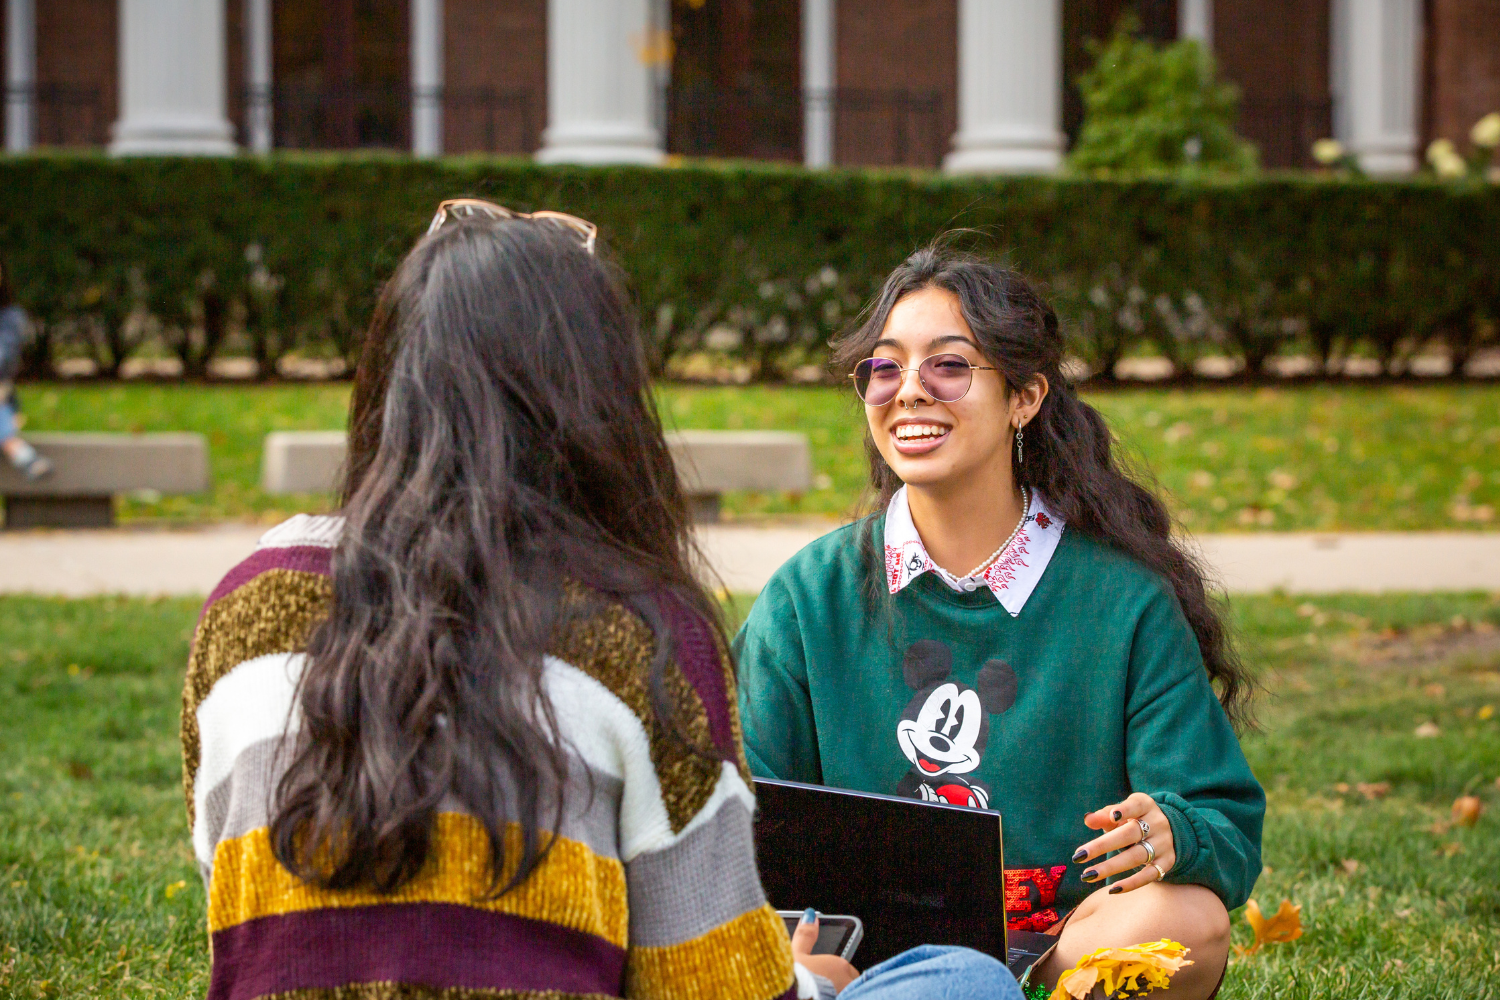 two students talking to each other and smiling